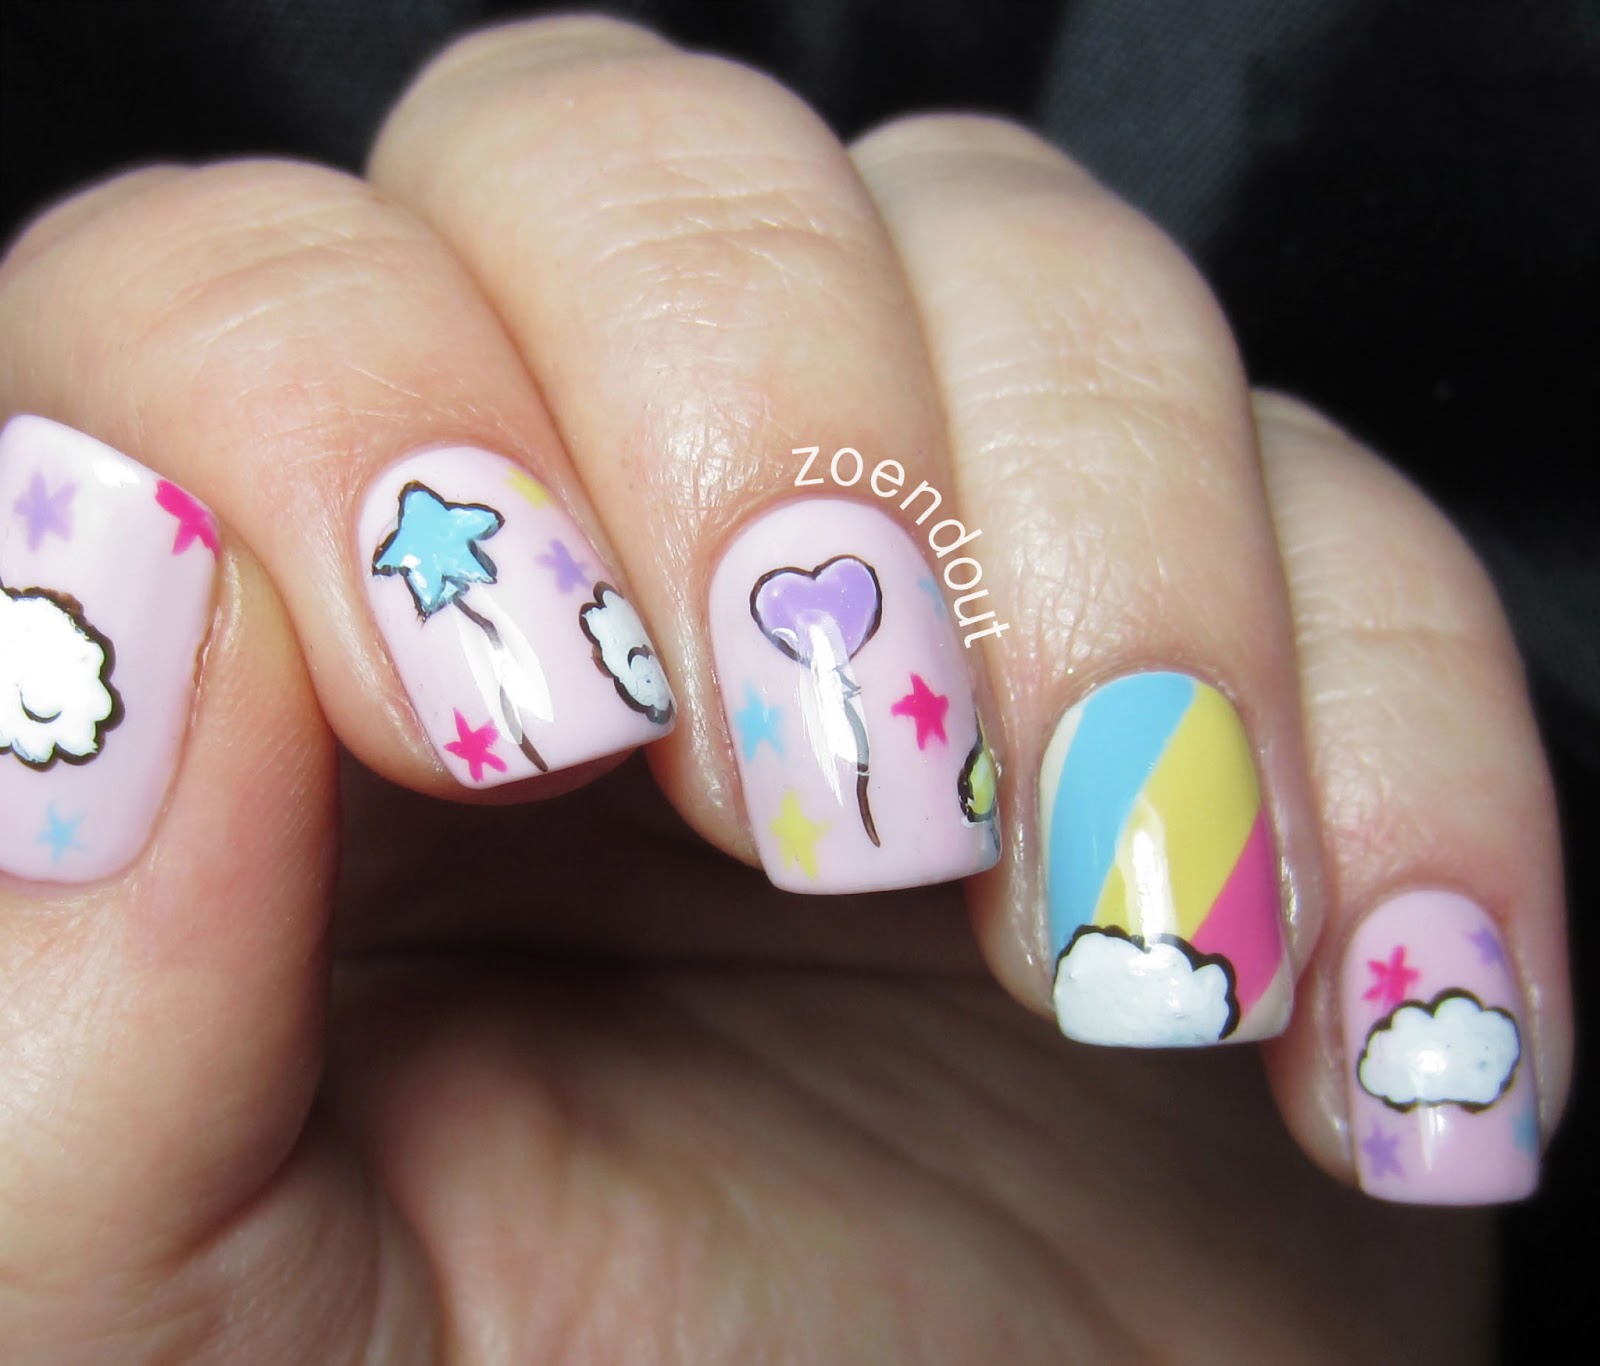 Zoendout Nails: February 2013